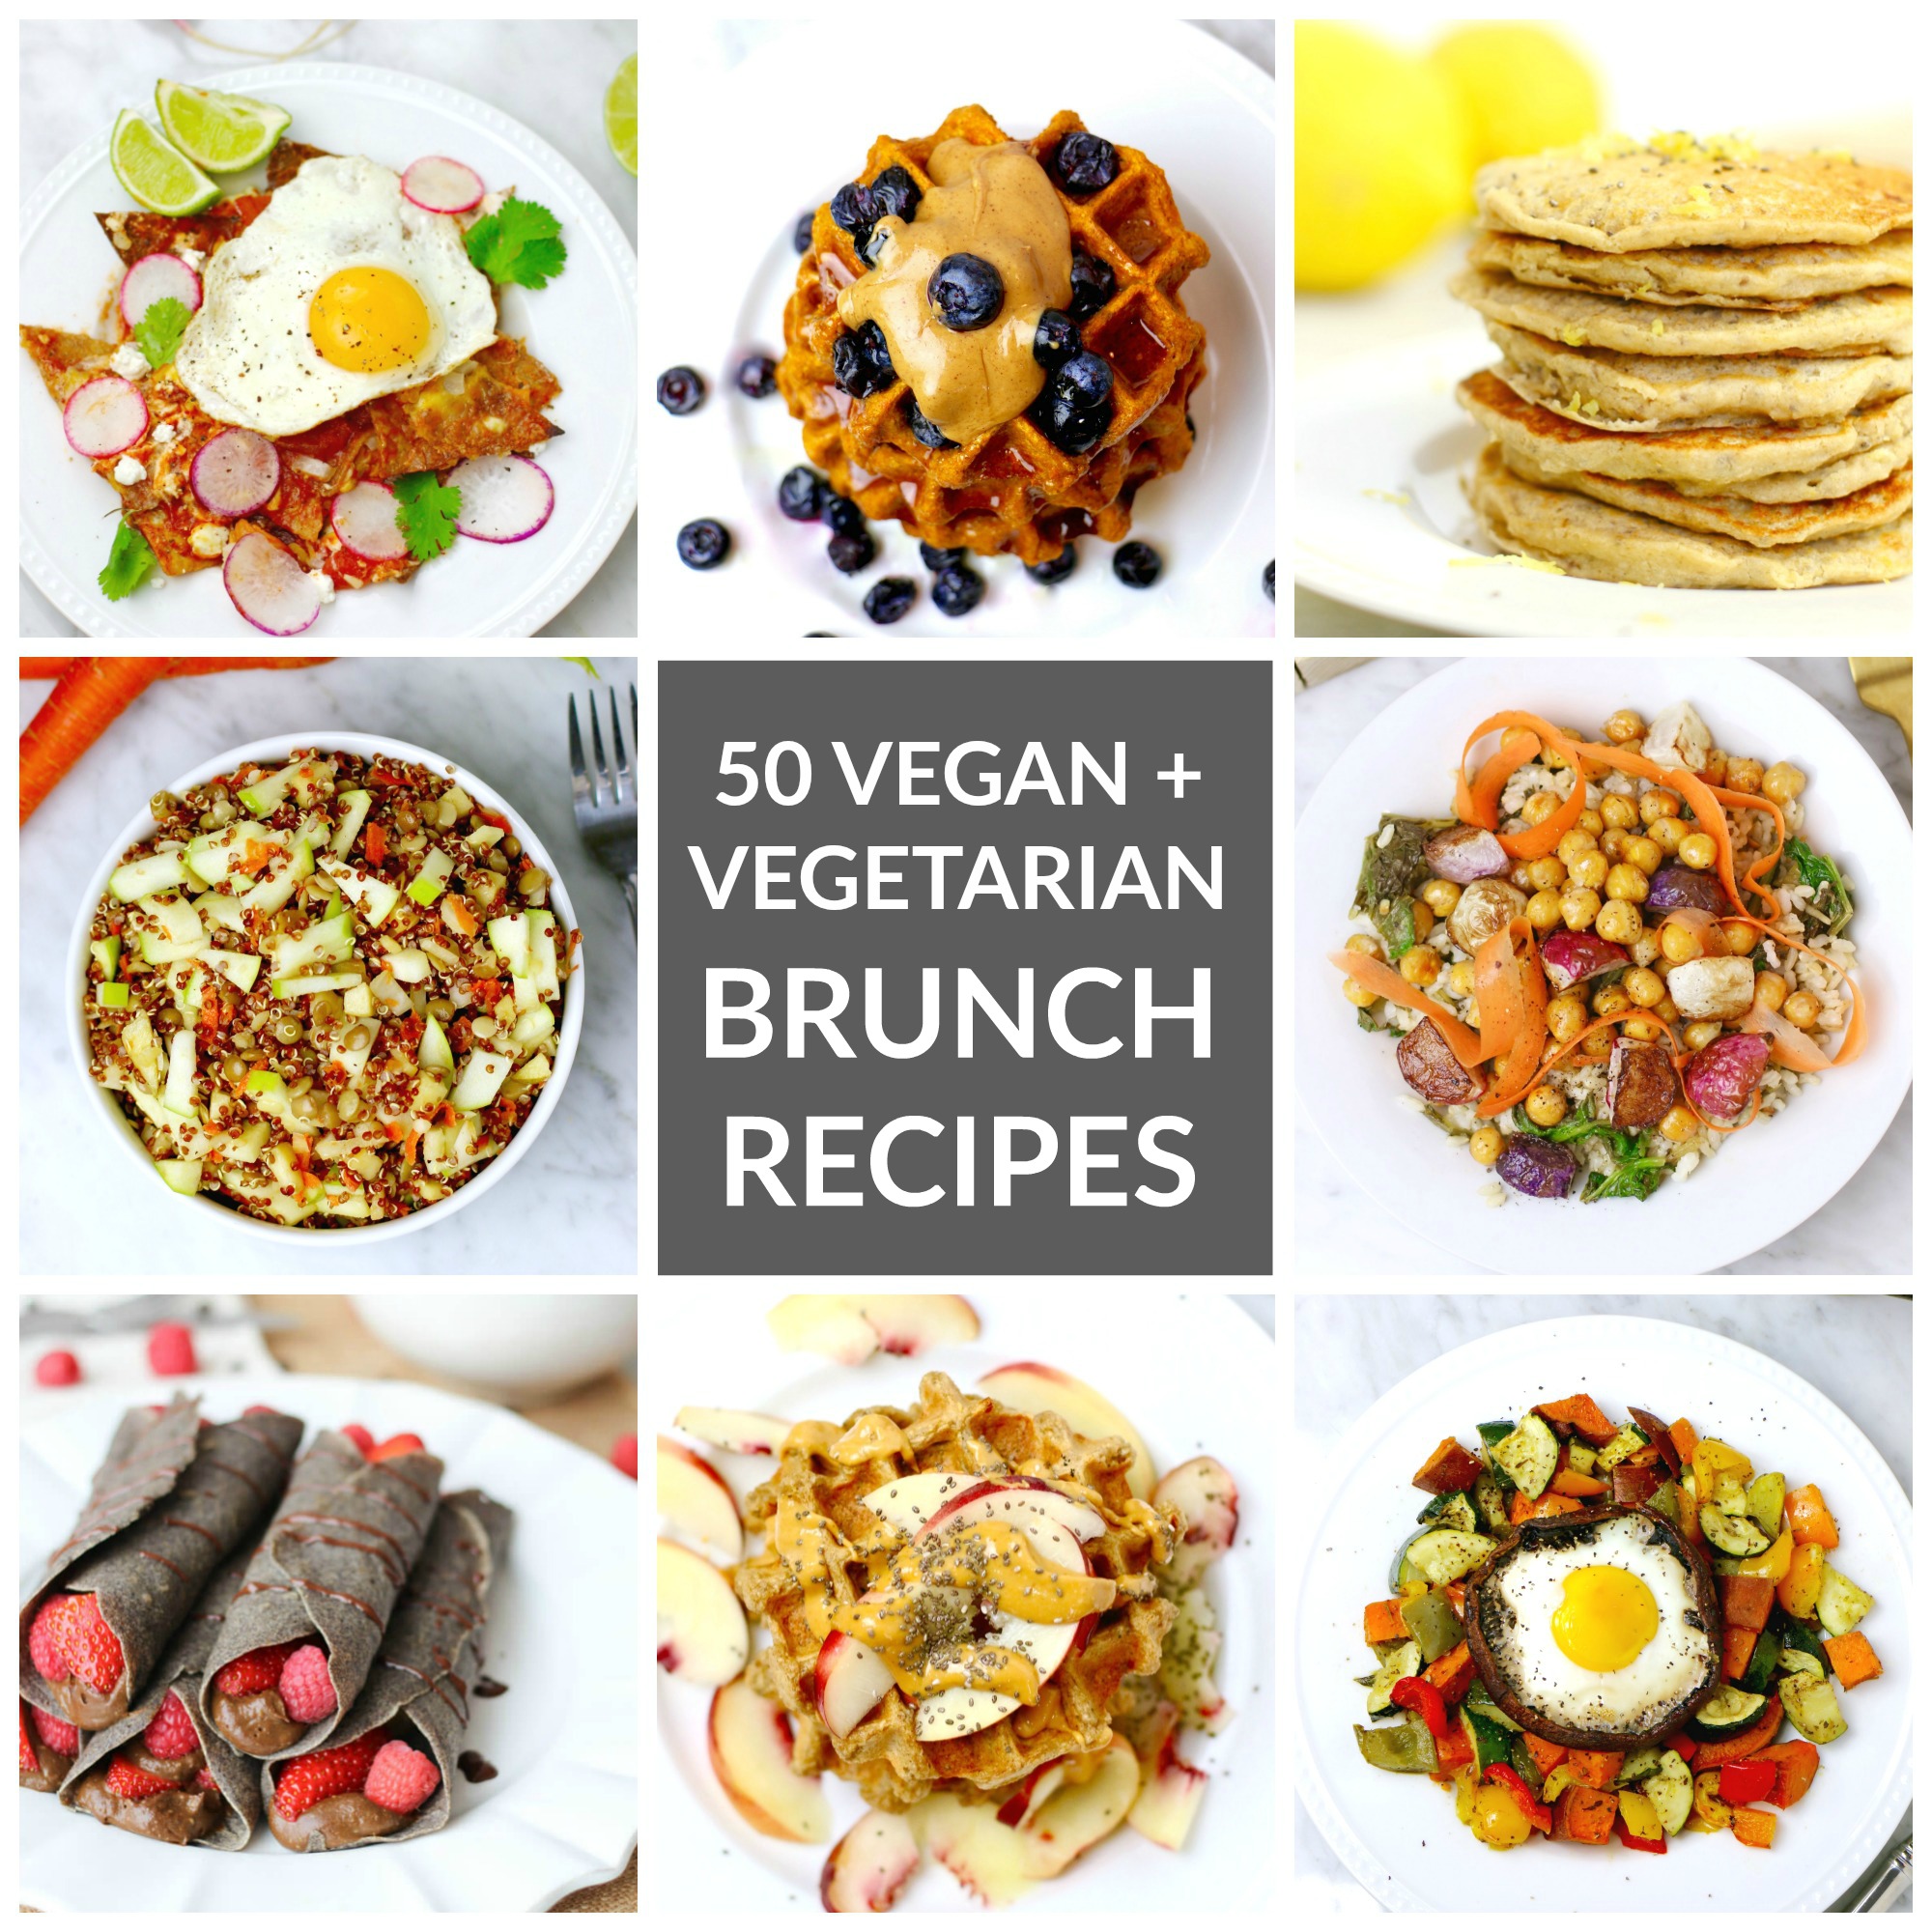 50 Vegan + Vegetarian Brunch Recipes for Mother's Day - delicious, nutritious vegan and vegetarian recipes perfect for your Moth